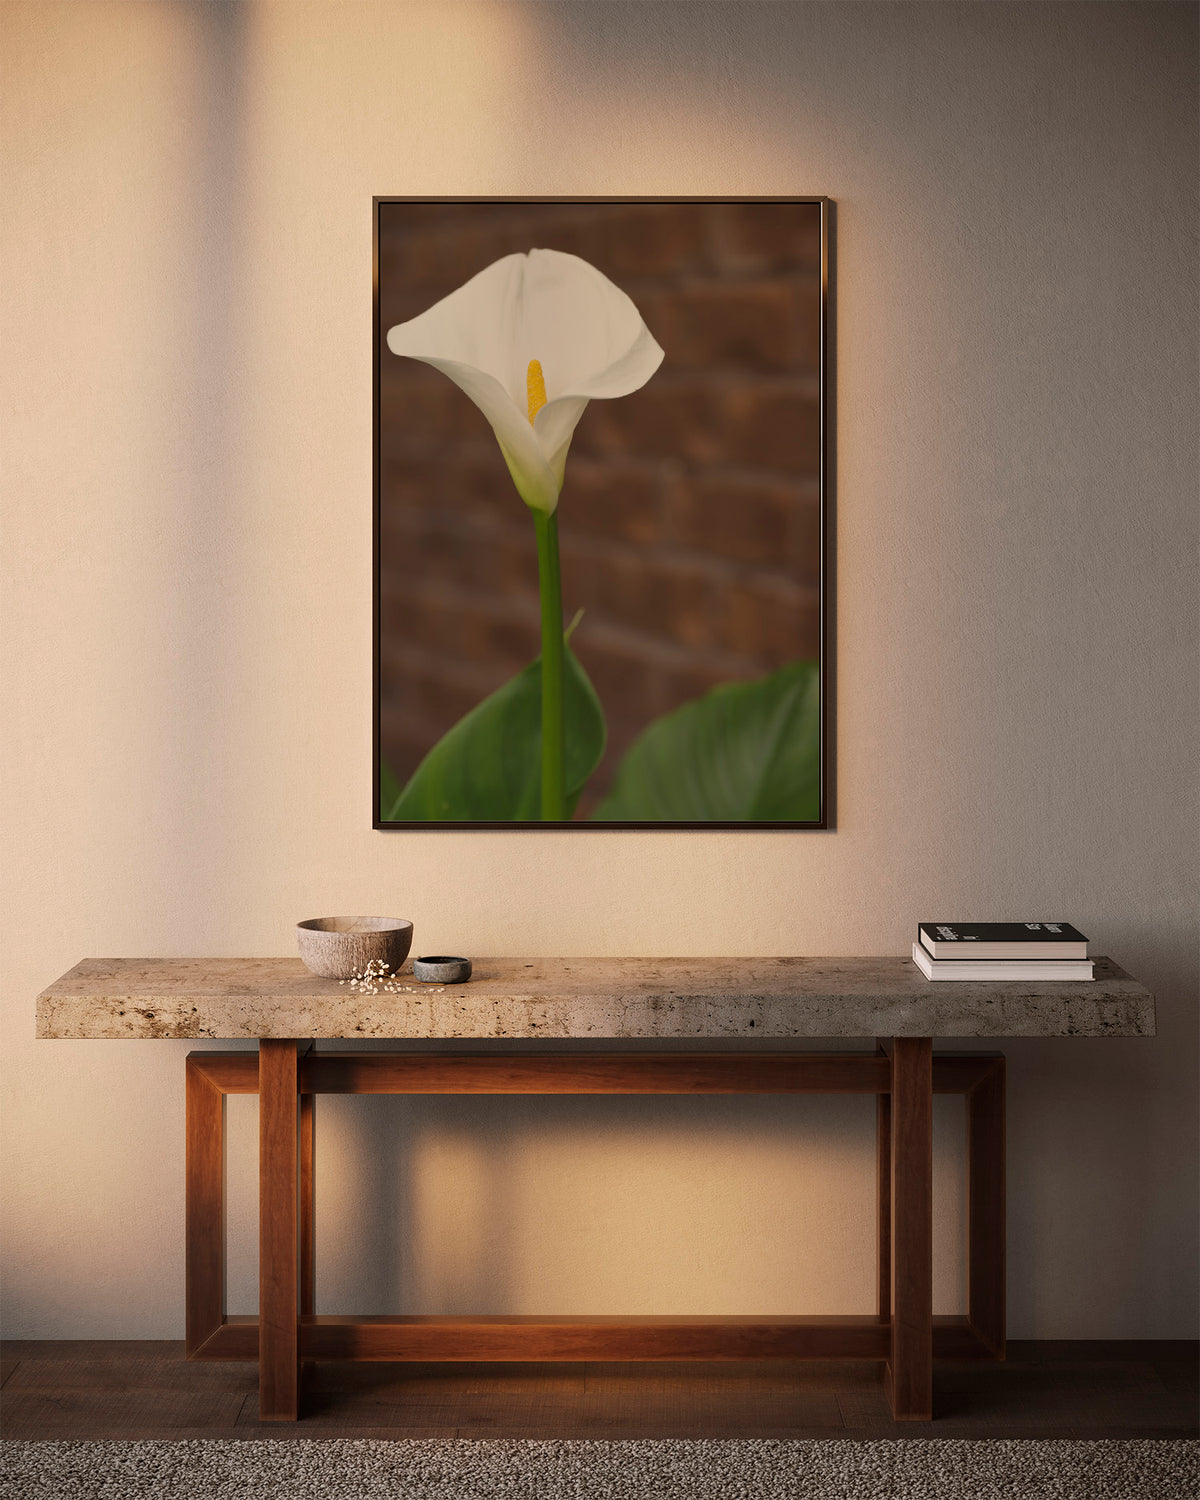 Canvas wrap with a white lily flower in full bloom in front of a brown brick wall.   NOTES:  Lily flower in bloom Brick wall background Made to Order Designer: @Makkersmedia Canvas Wrap:  Produced in-house. Printing by HP commercial wide-format printers. MATERIAL:  Aurora Expressions Poly/Cotton Canvas with Satin/Matte Finish  Base Color: White